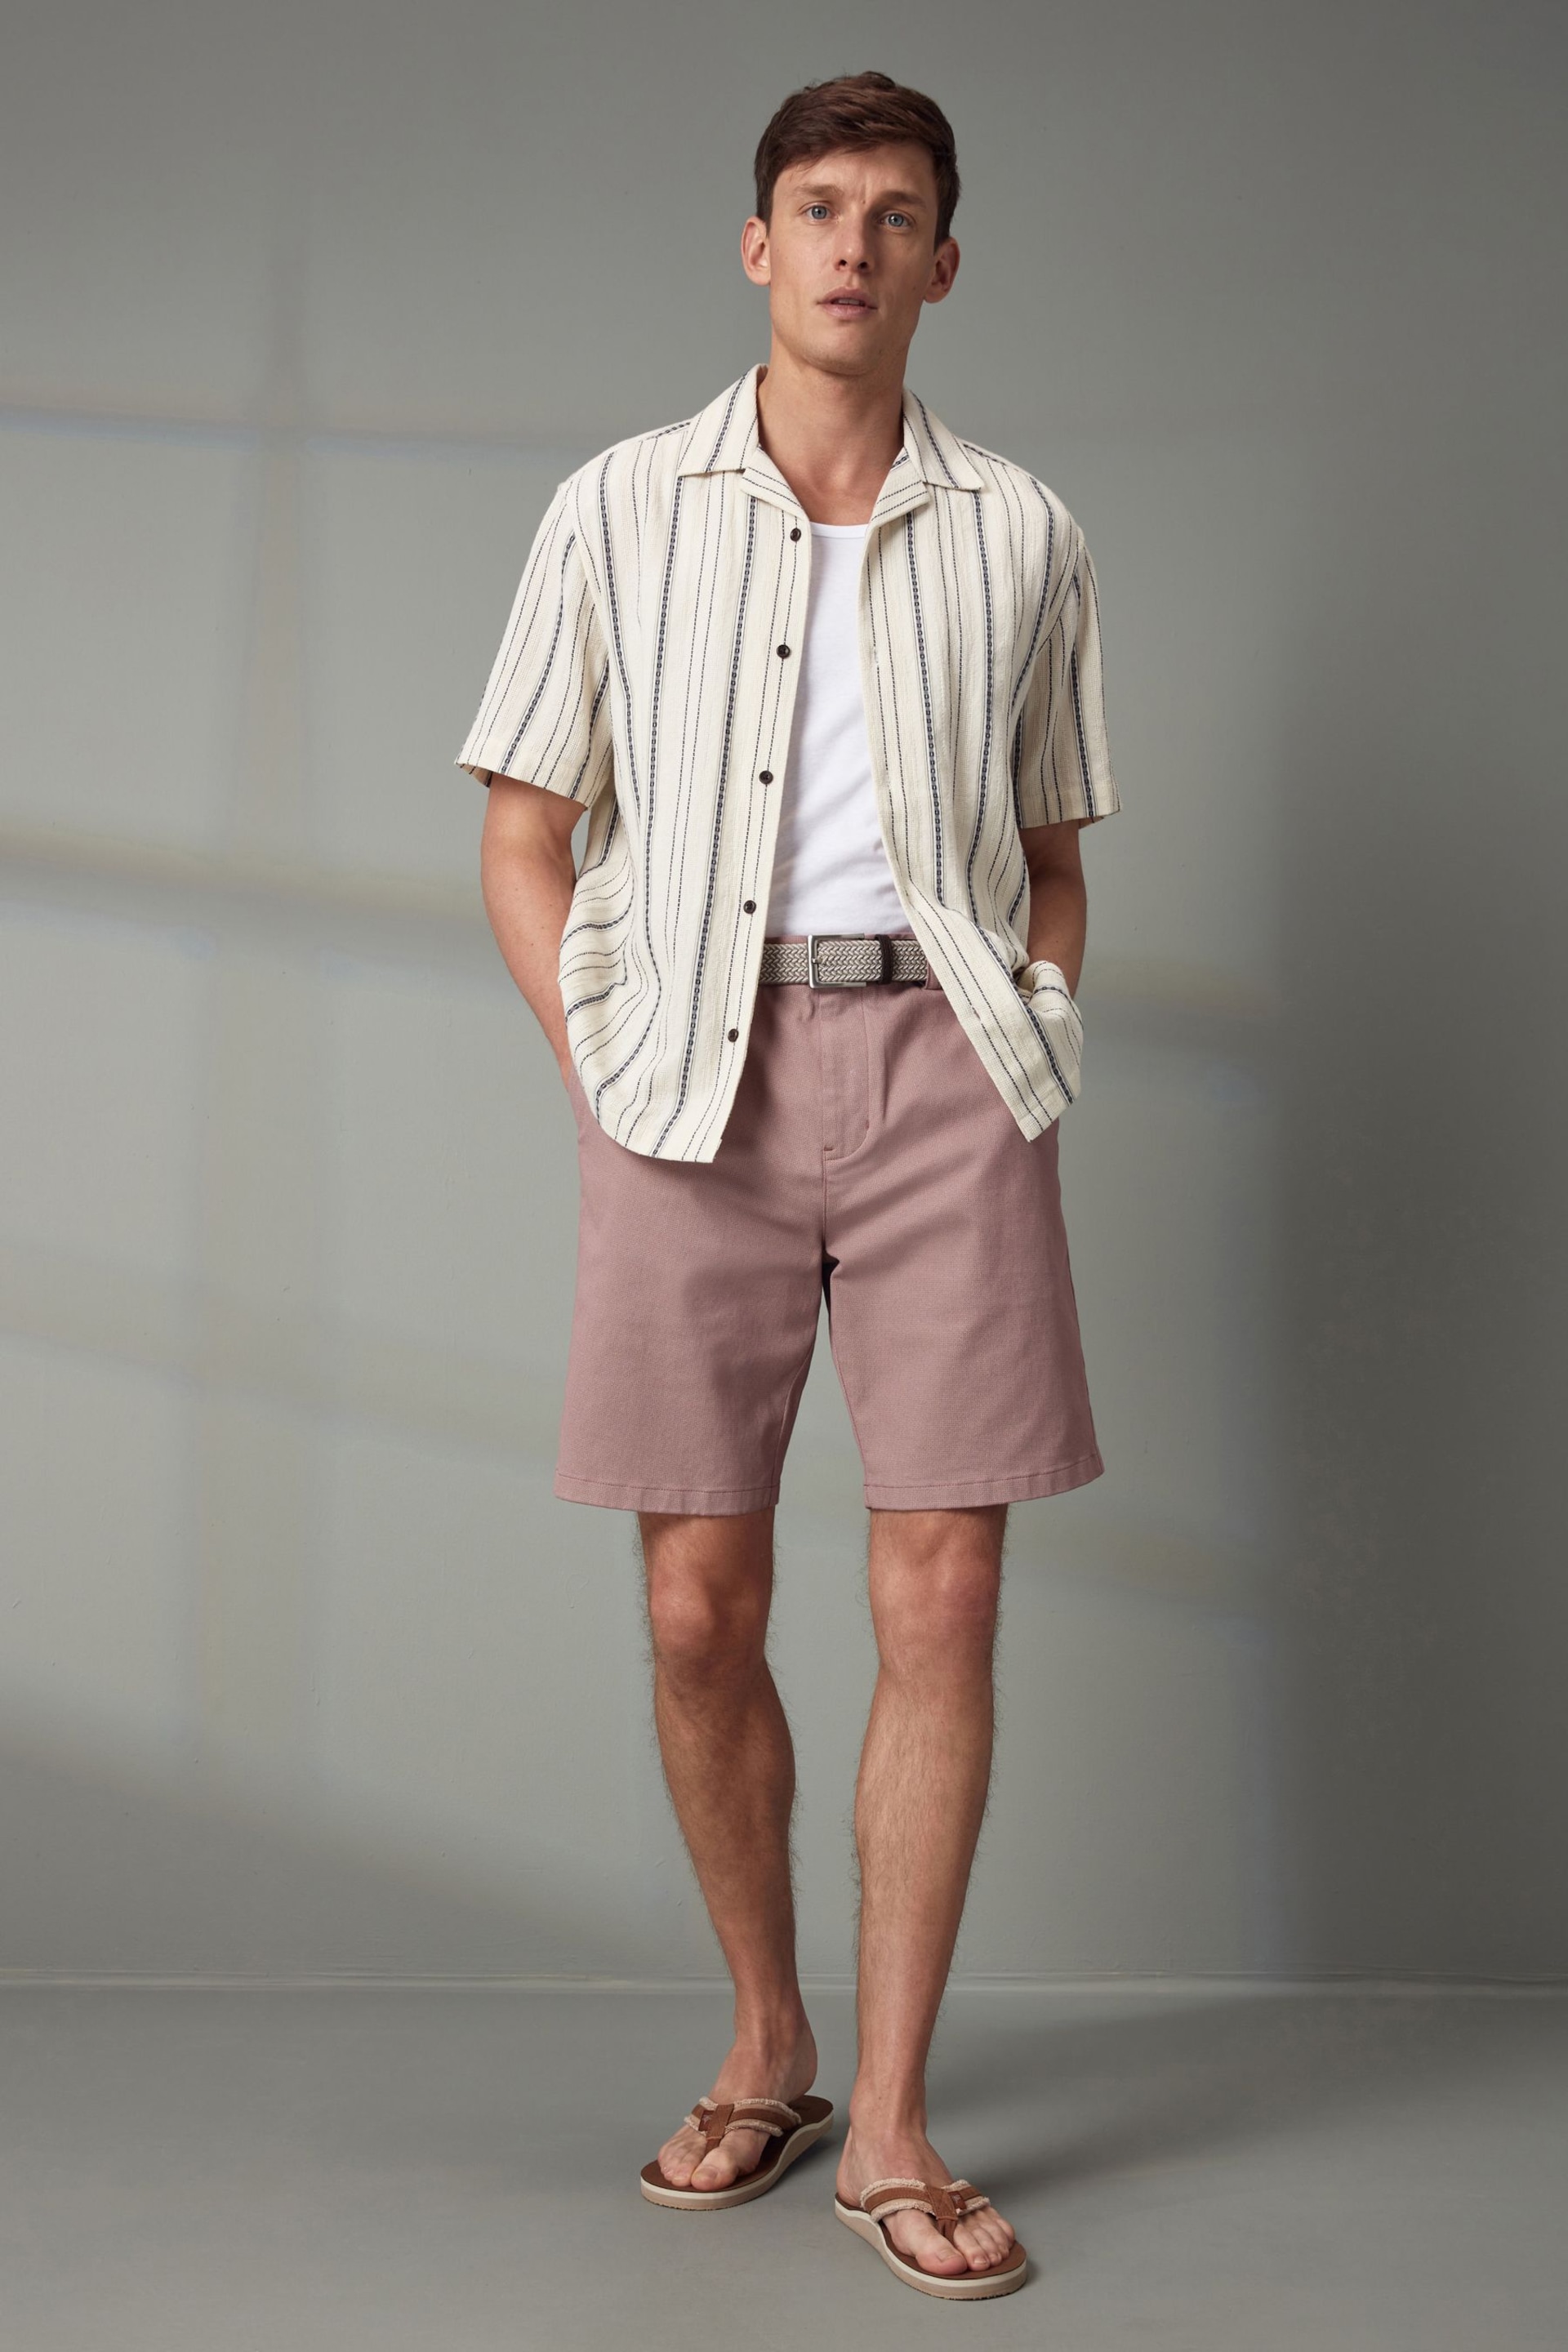 Pink Textured Cotton Blend Chino Shorts with Belt Included - Image 2 of 9